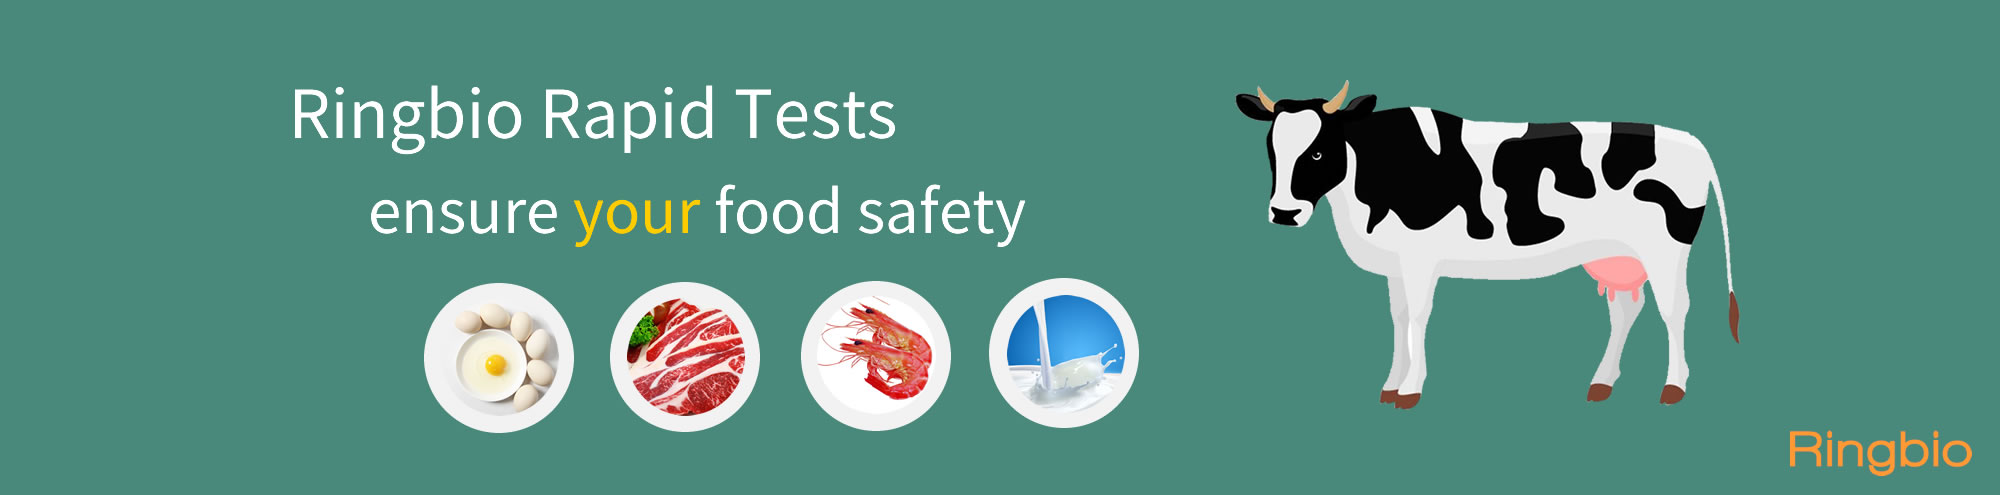 Ringbio Rapid Test Kits, ensure your food safety